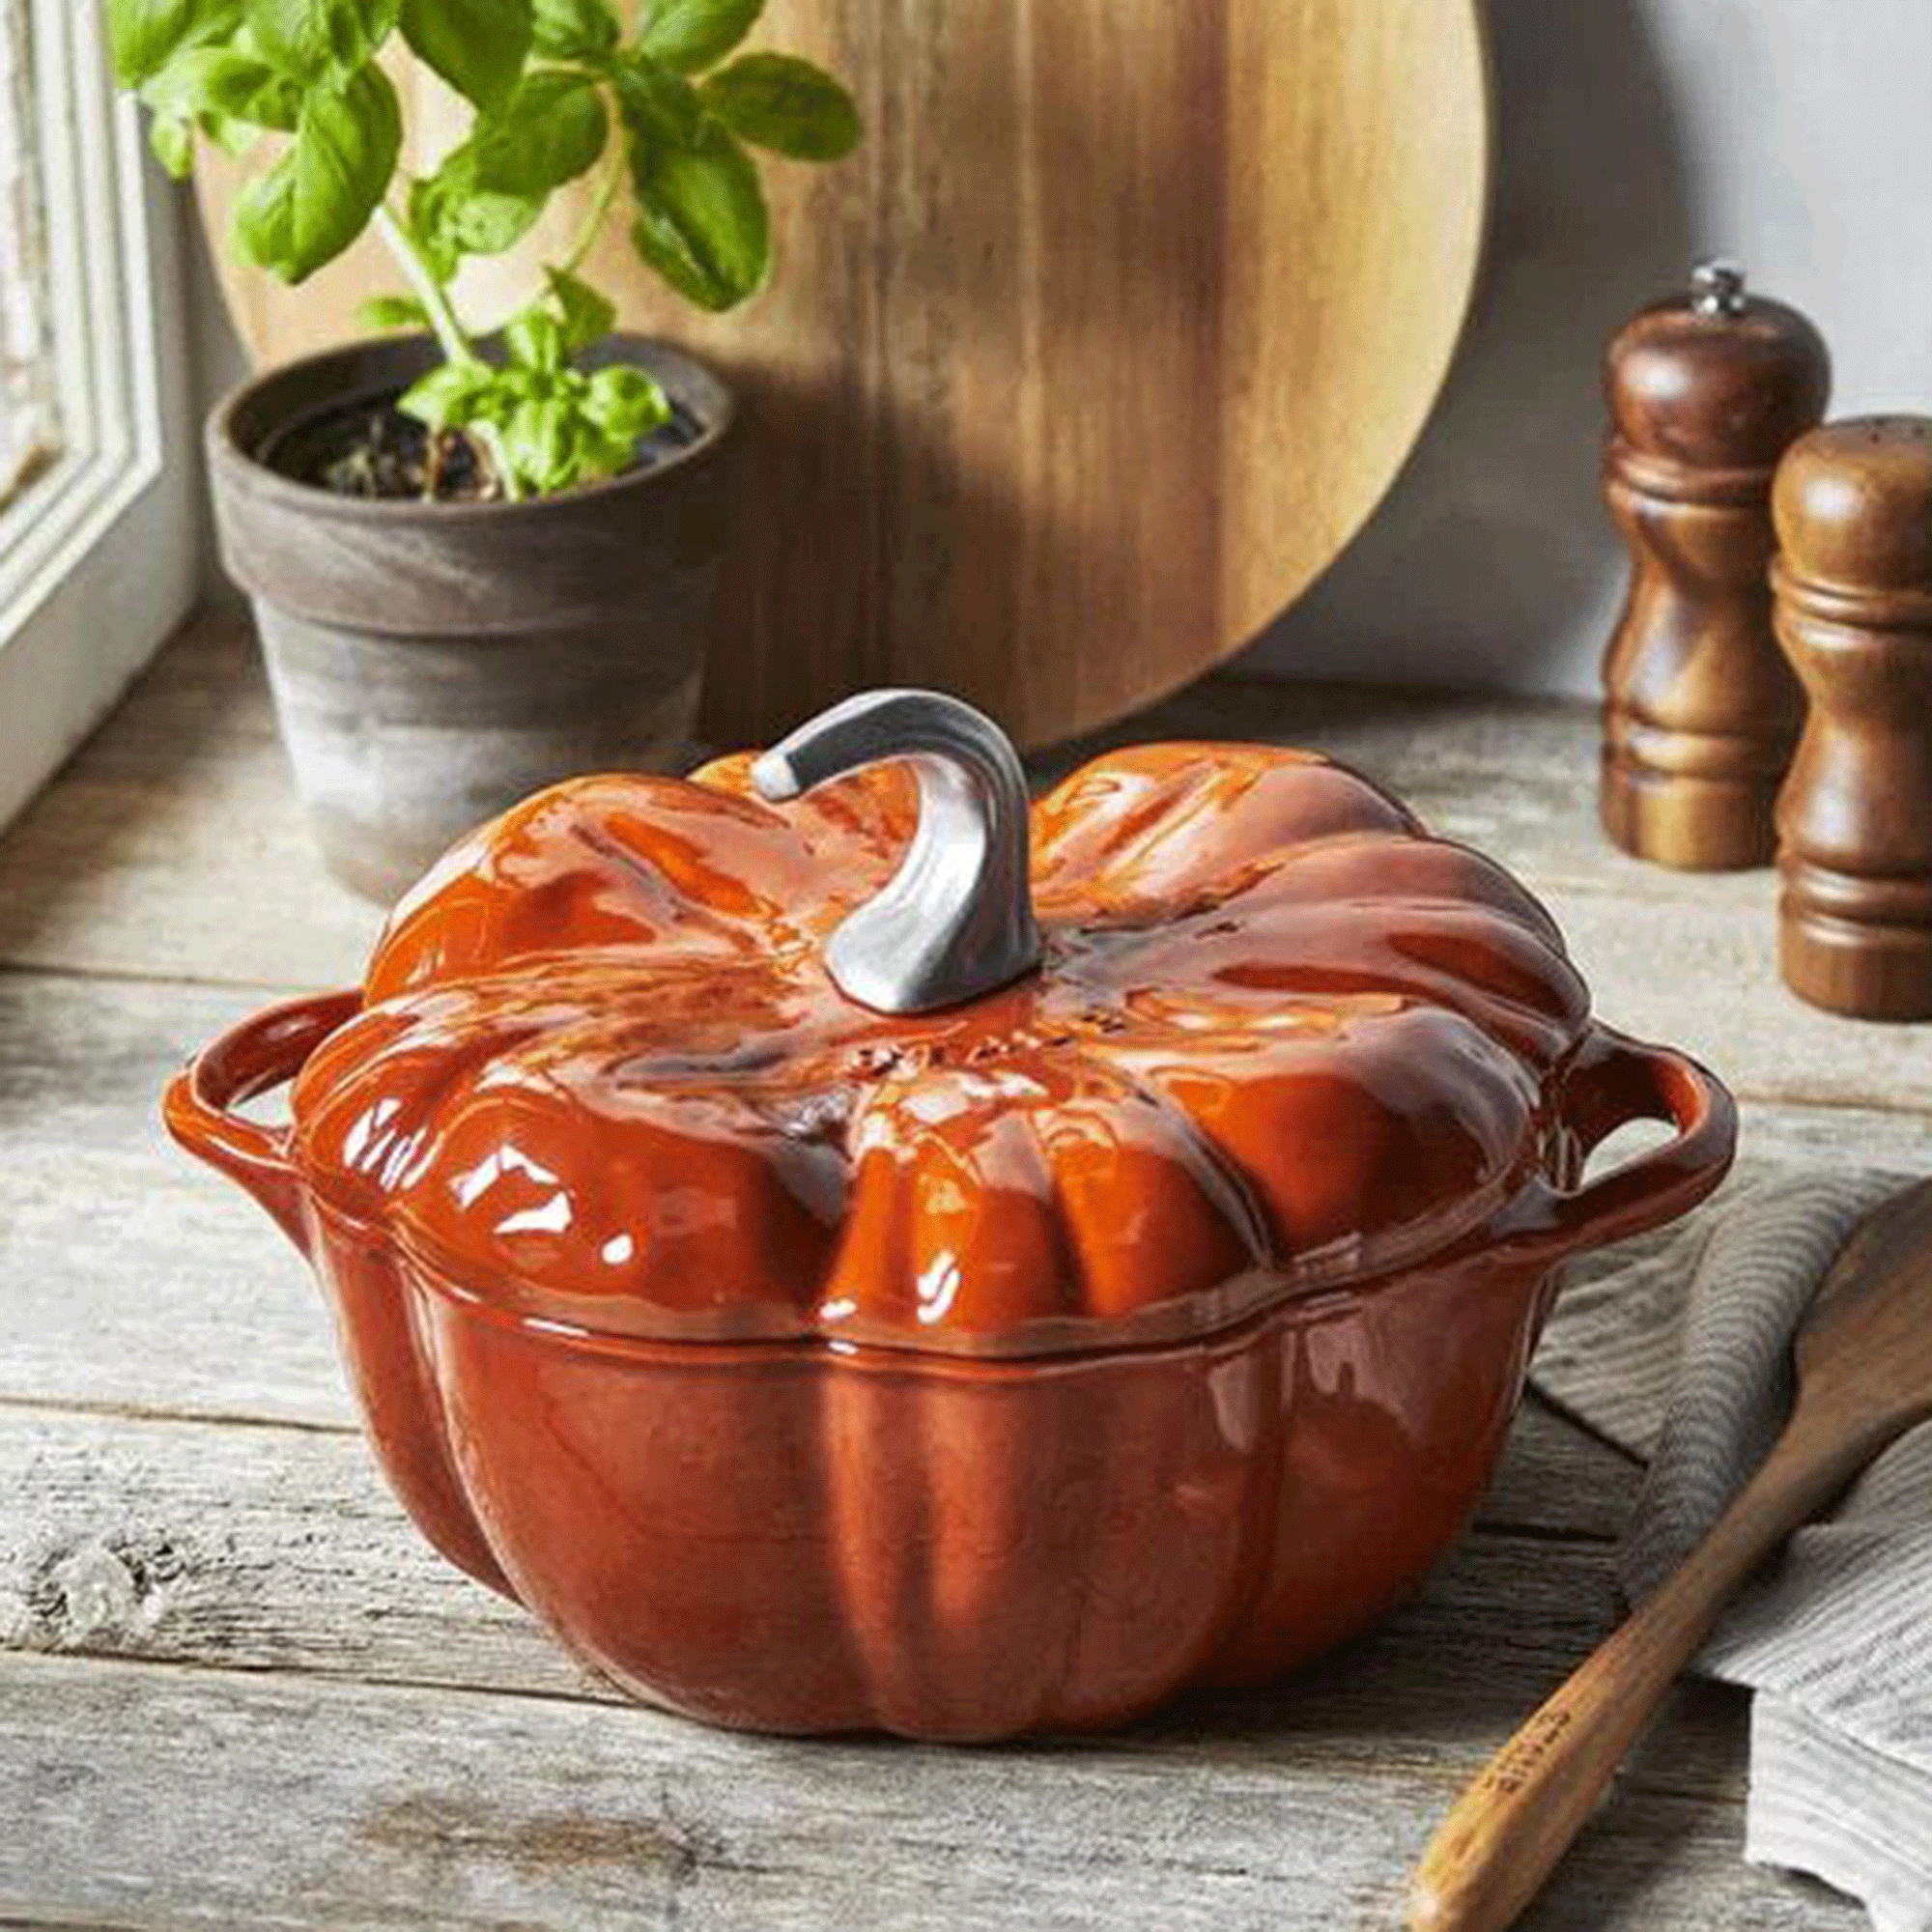 This pumpkin cast iron dish has become my favourite piece of cookware - I'll be using it long after Halloween